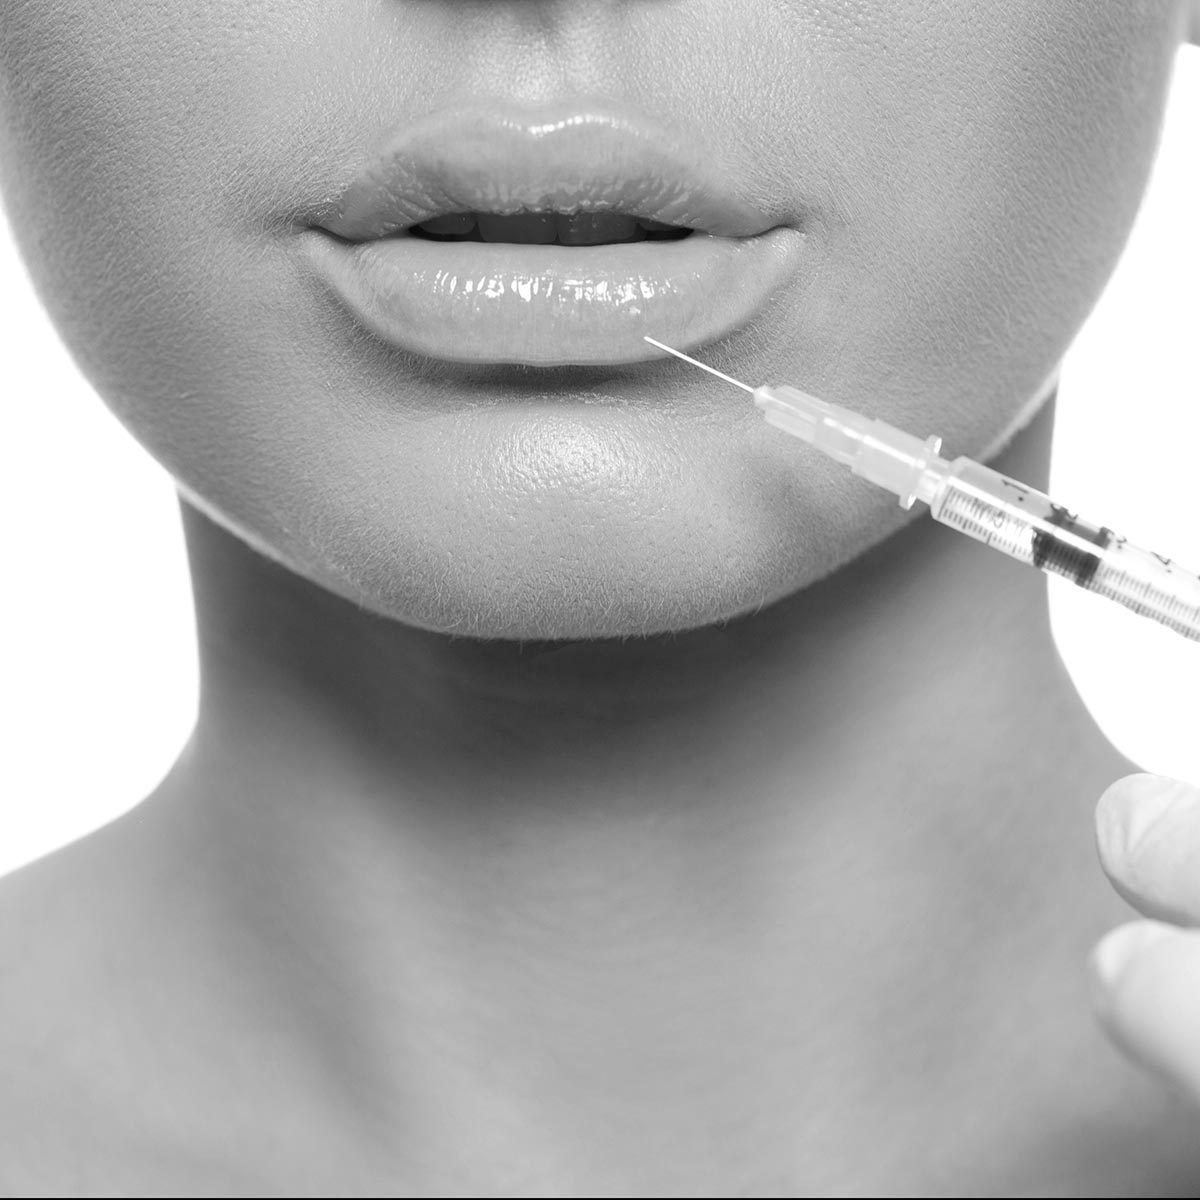 closeup beautiful woman face, syringe injection to lips beauty concept